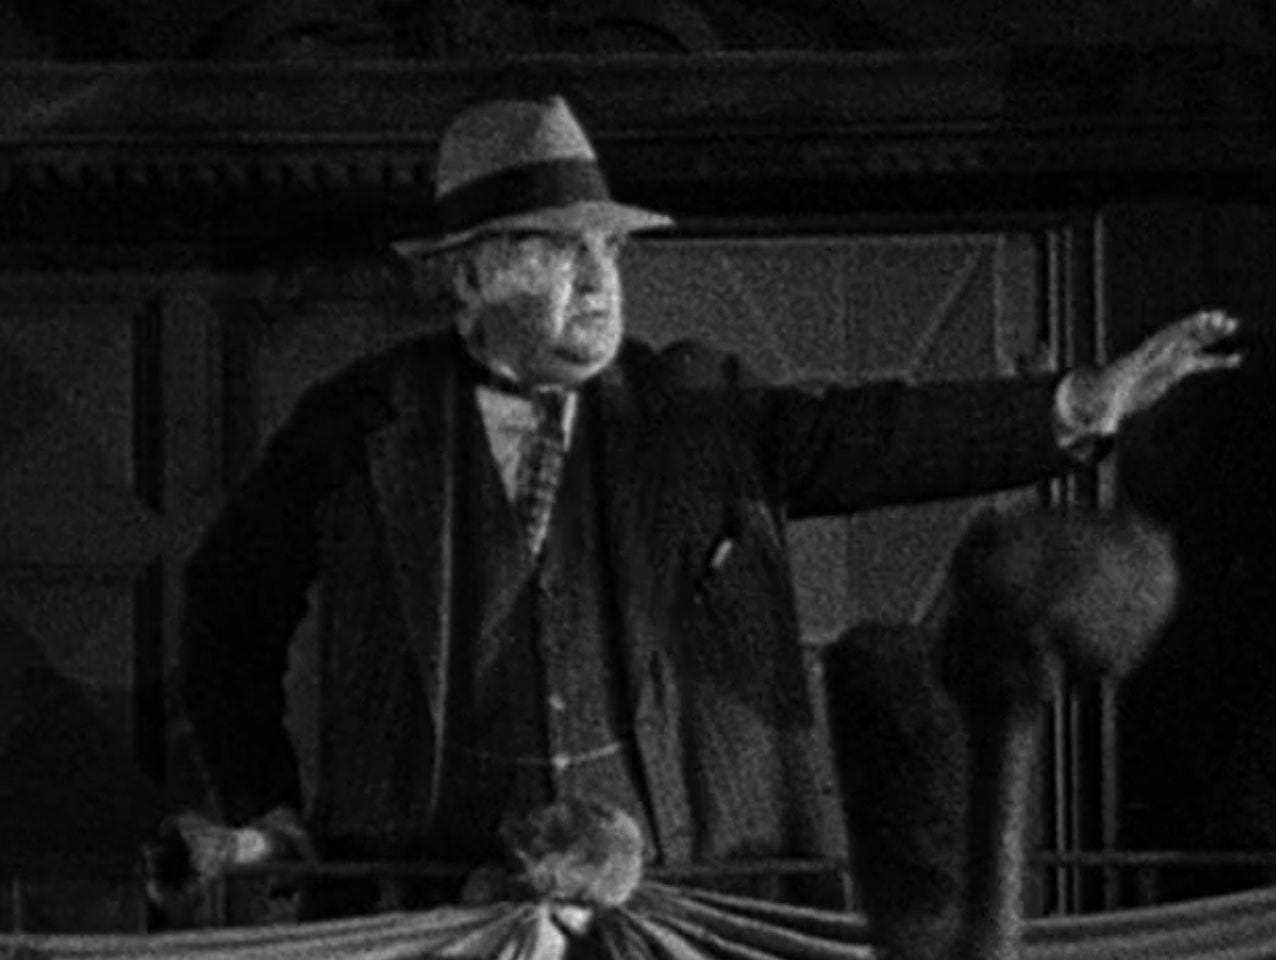 Mayor the small town in the 1931 film Frankenstein speaks from the balcony of the town hall, rallying the townspeople to take on the monster, He’s wearing a trilby